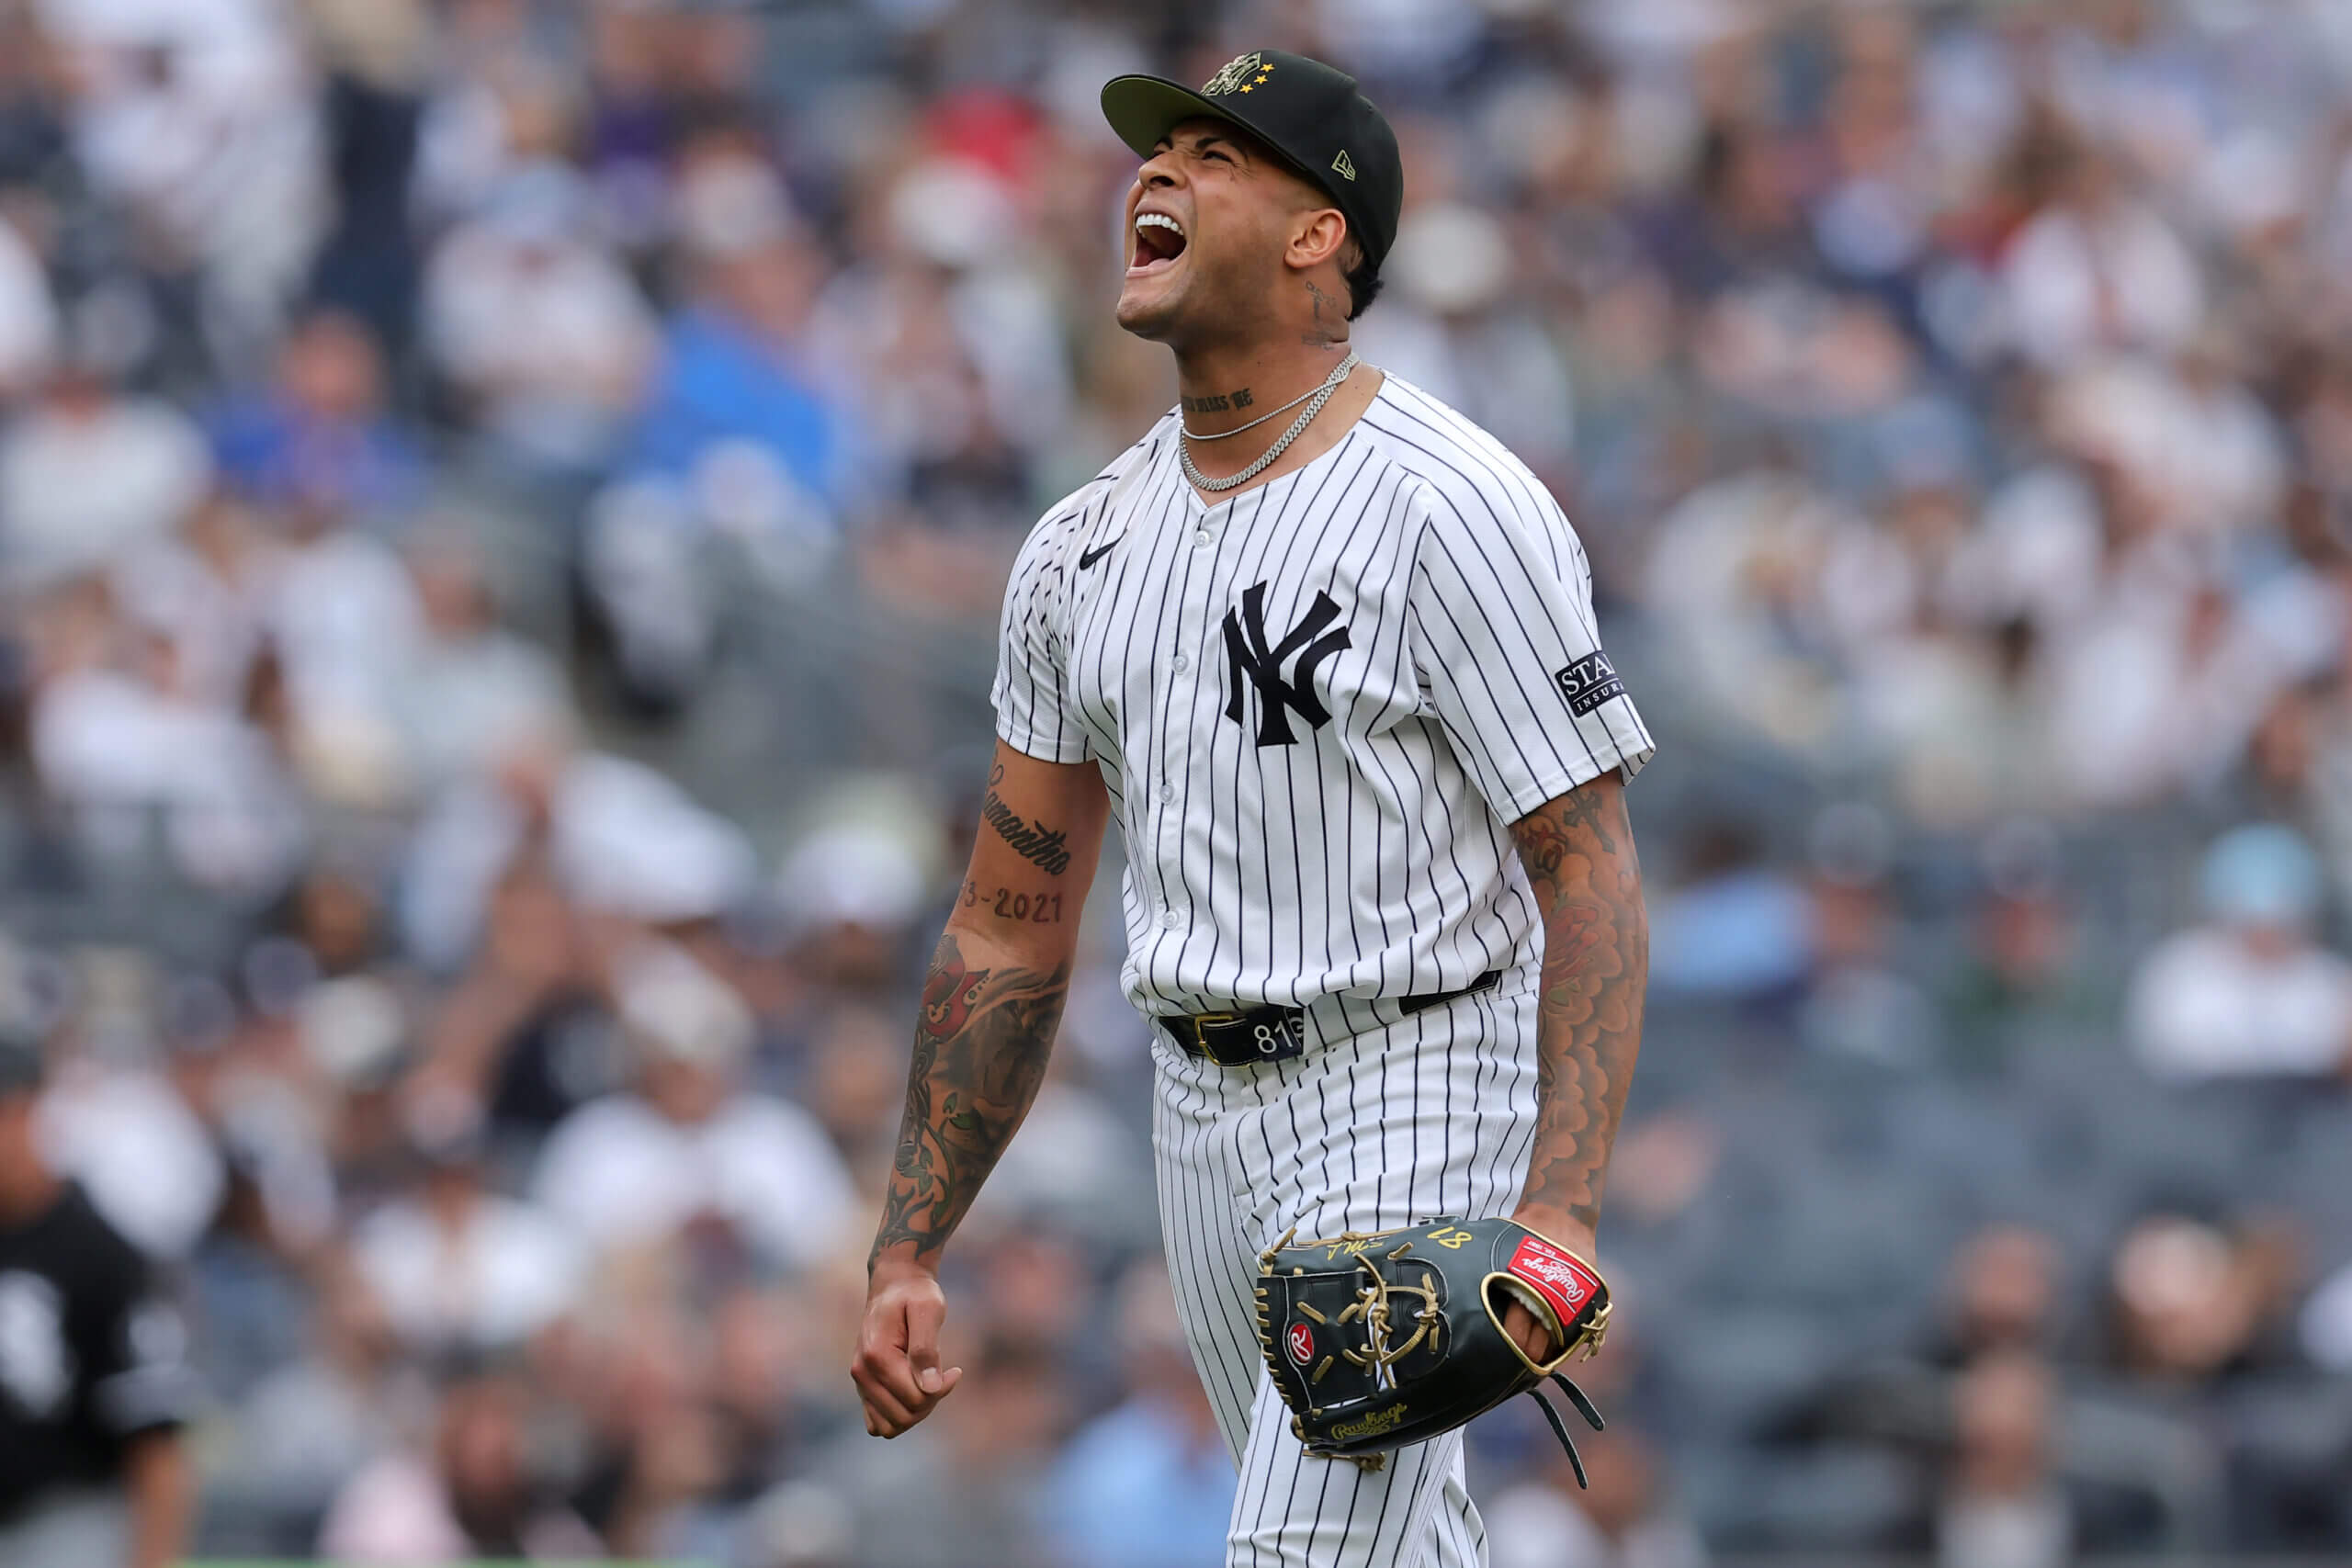 As Luis Gil dominates, Yankees face 2 pressing questions about his future